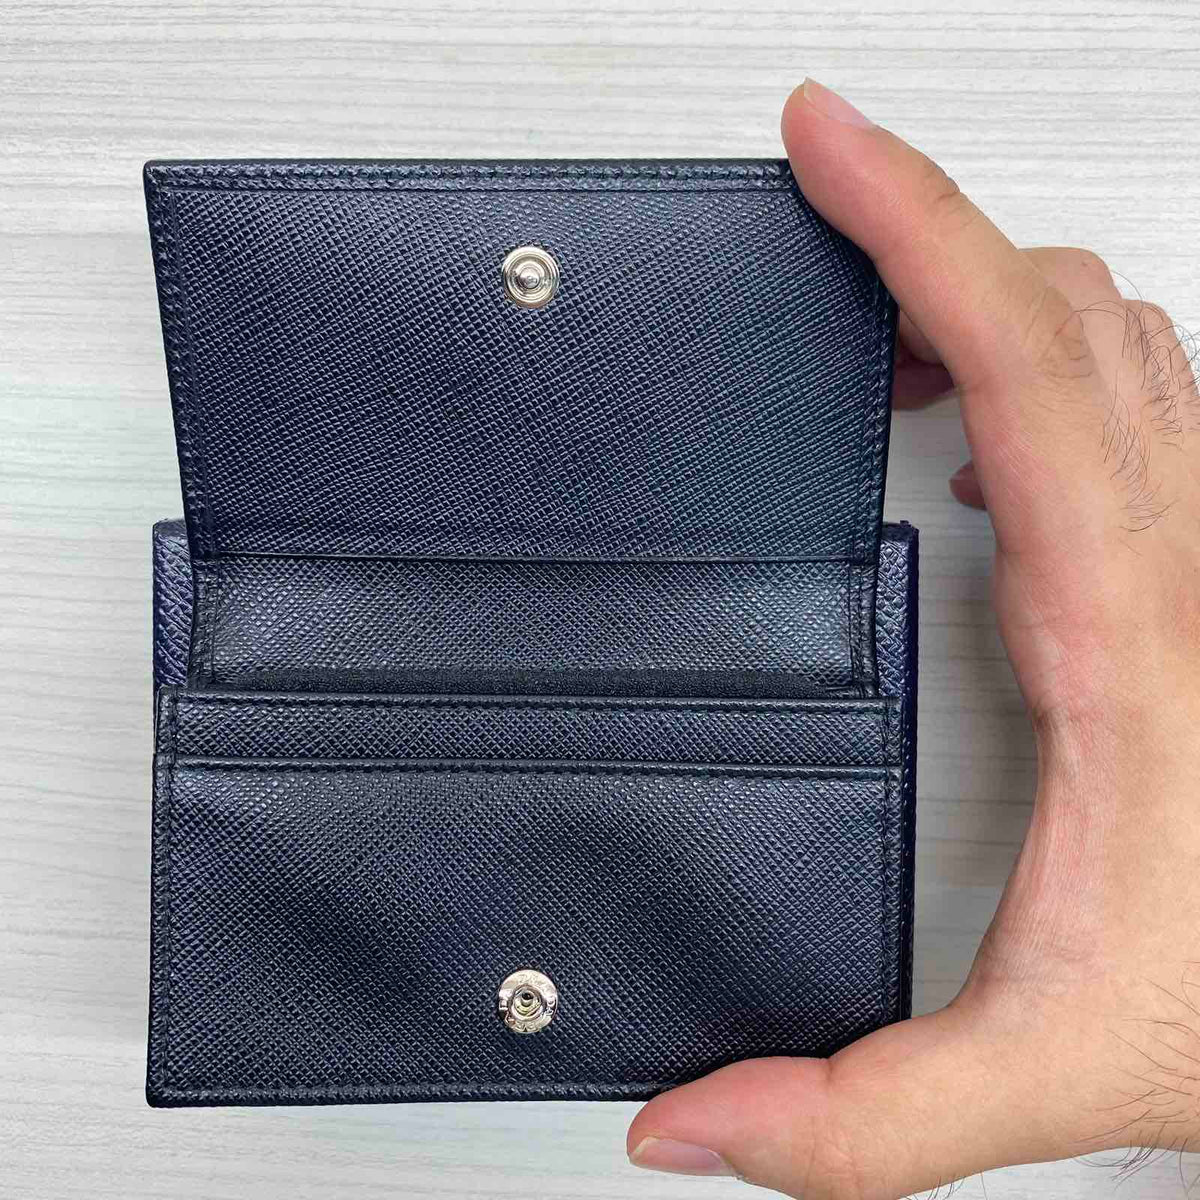  Prada Card Case Business Card Holder Saffiano Metal 2MC122  QME F0632 Parallel Import Goods : Clothing, Shoes & Jewelry